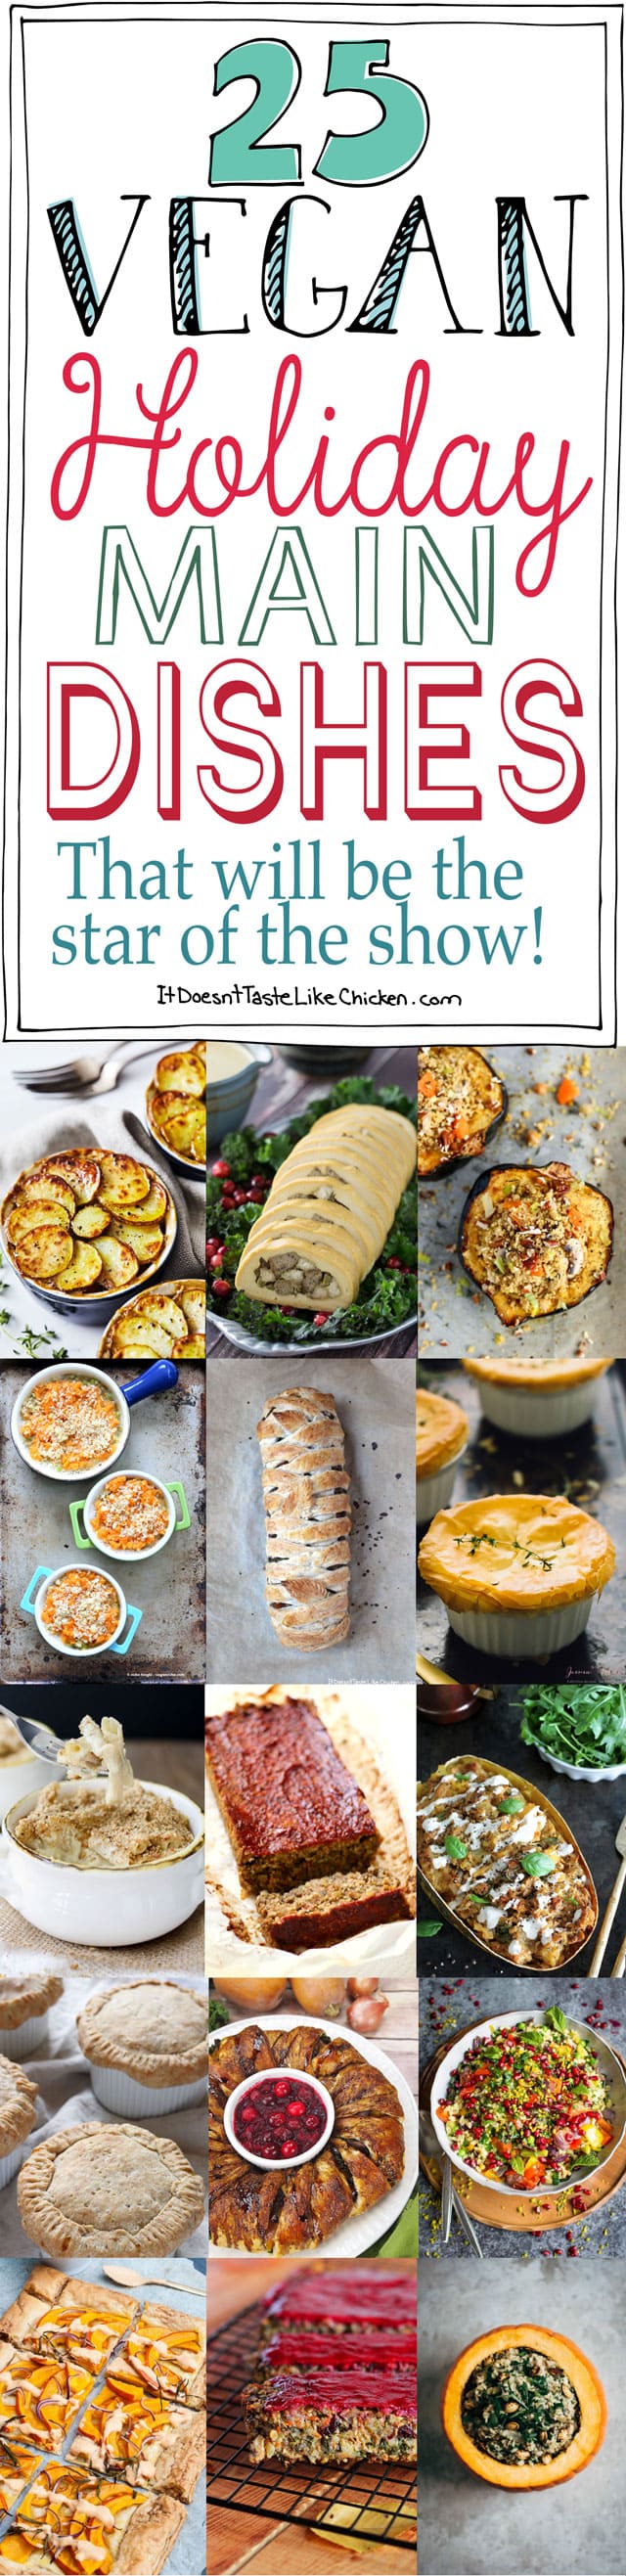 25 Vegan Holiday Main Dishes That Will be the Star of the Show! Perfect centerpiece dishes for Thanksgiving and Christmas. Lentil loaves, stuffed squash, pot pies, shepherd's pie, tarts, wellingtons, and all things totally centerpiece worthy. #itdoesnttastelikechicken